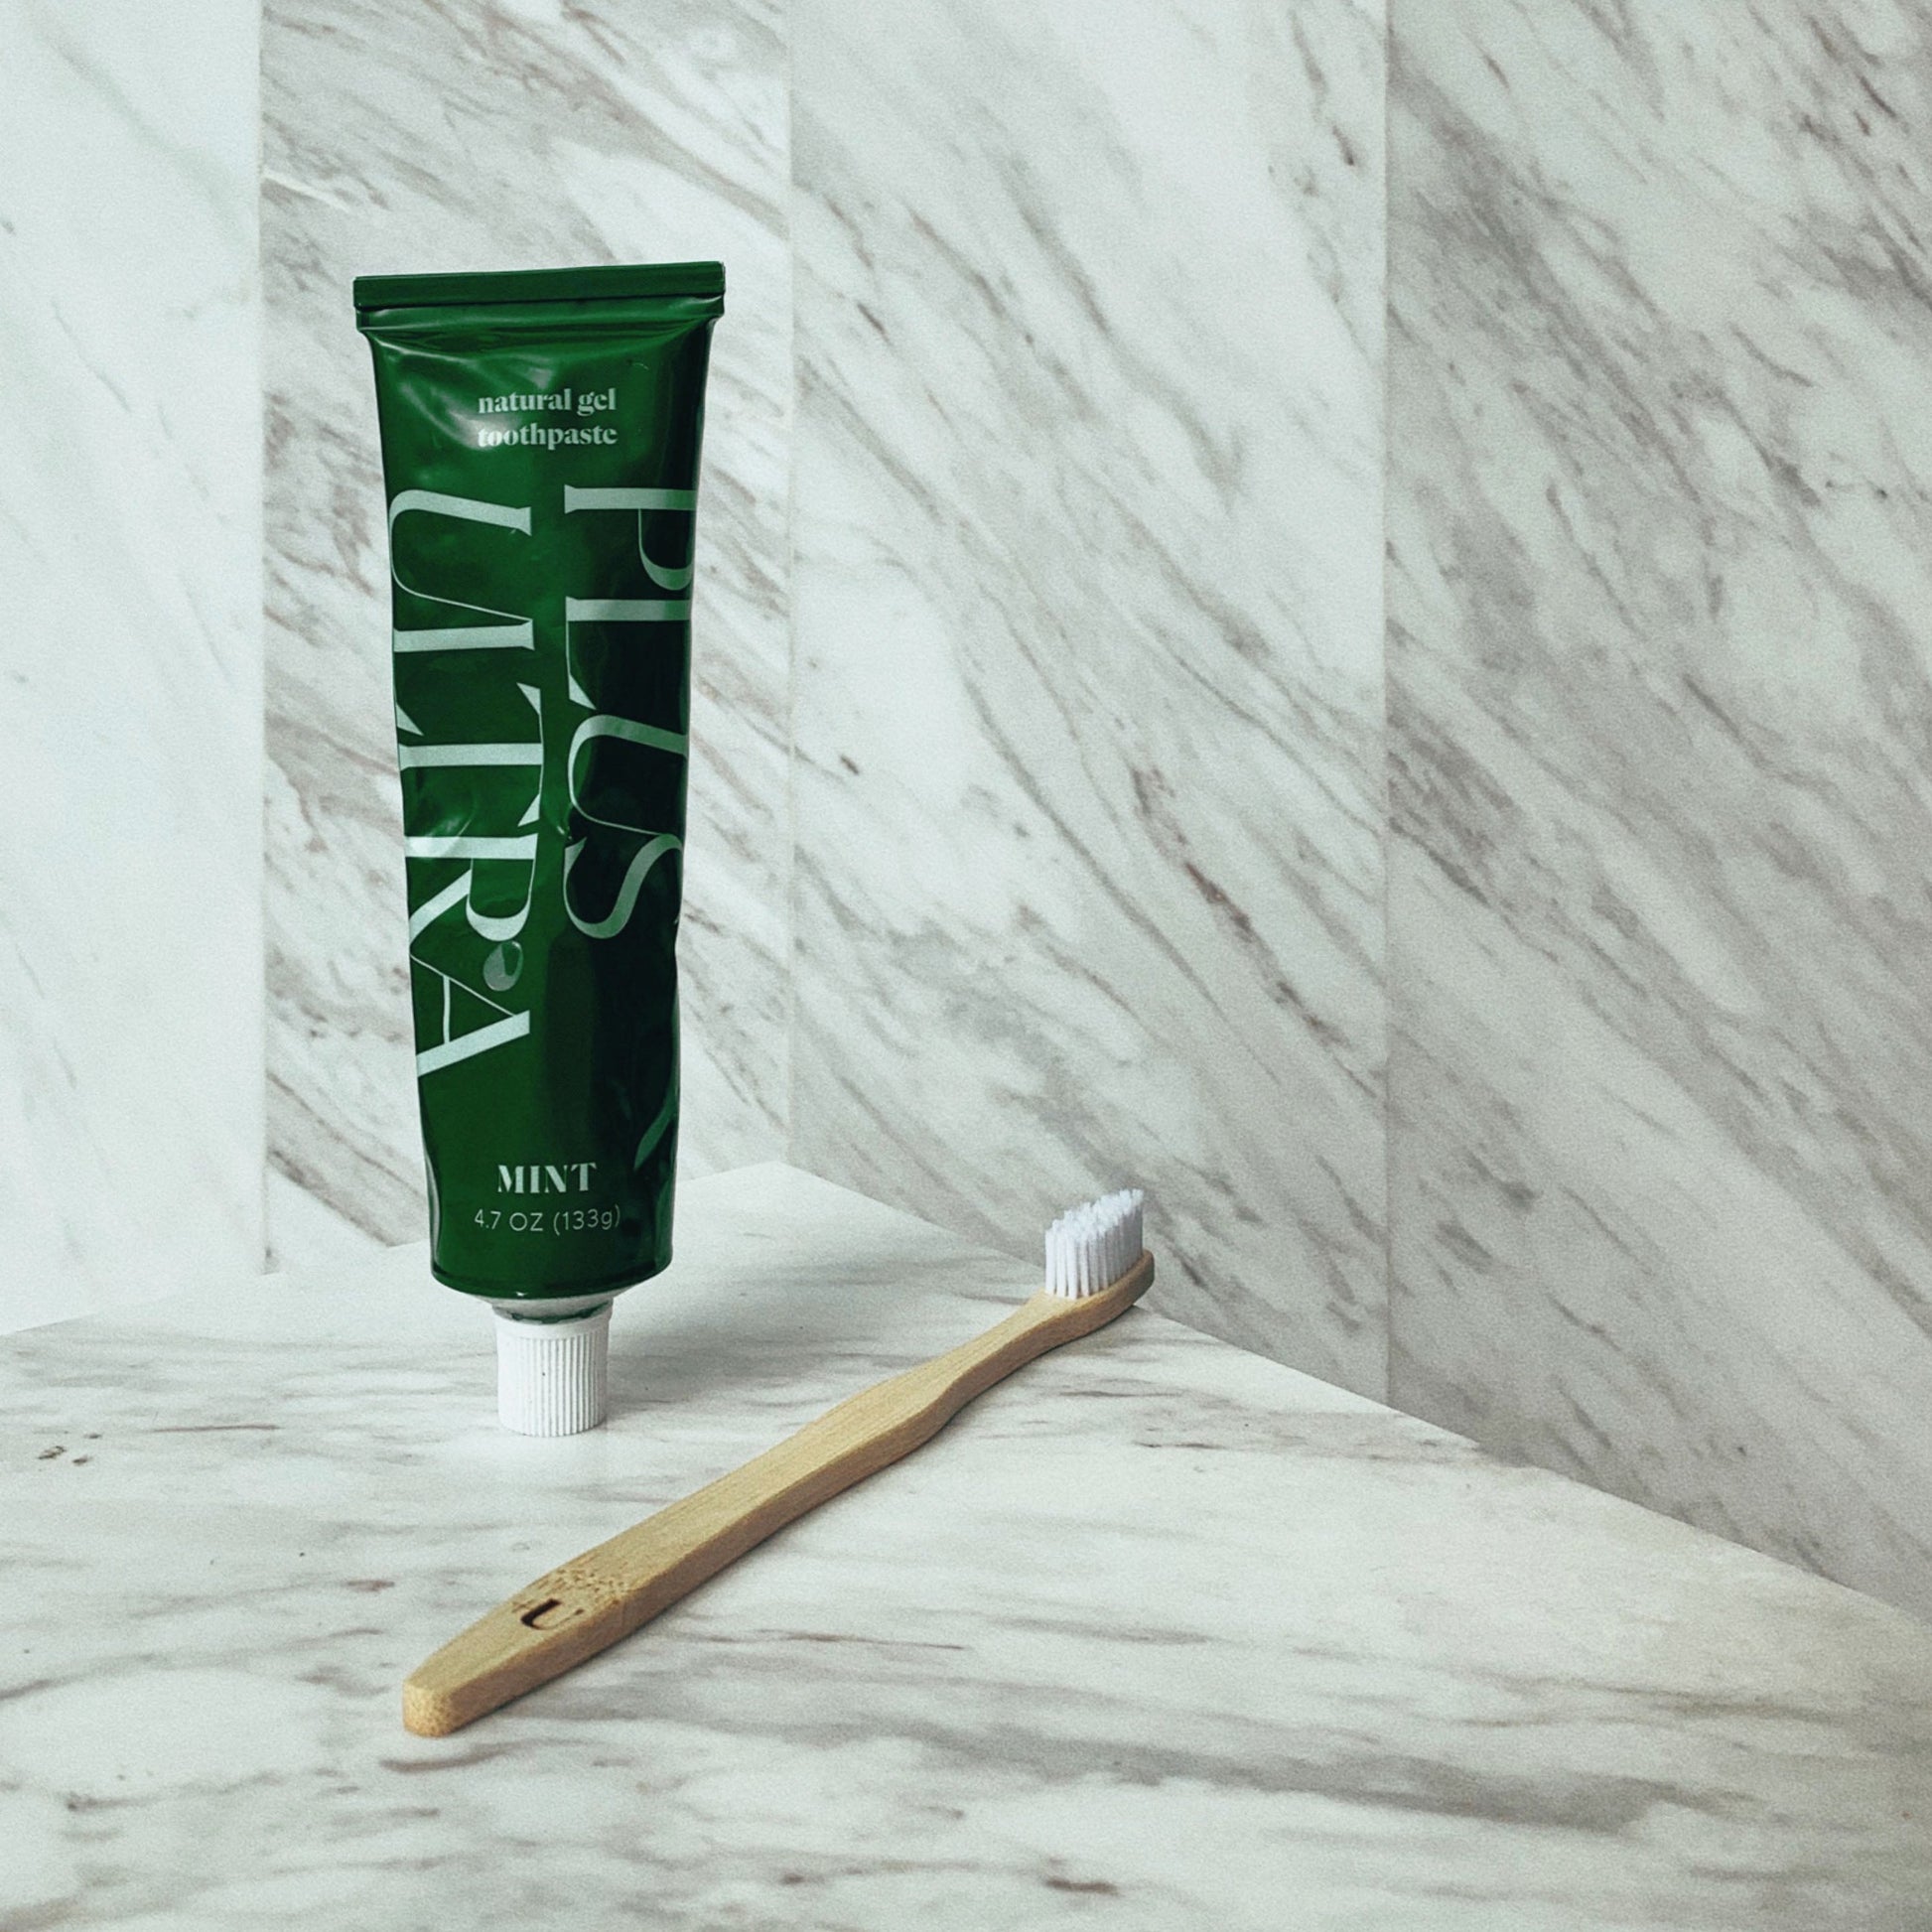 Plus Ultra - Natural Gel toothpaste